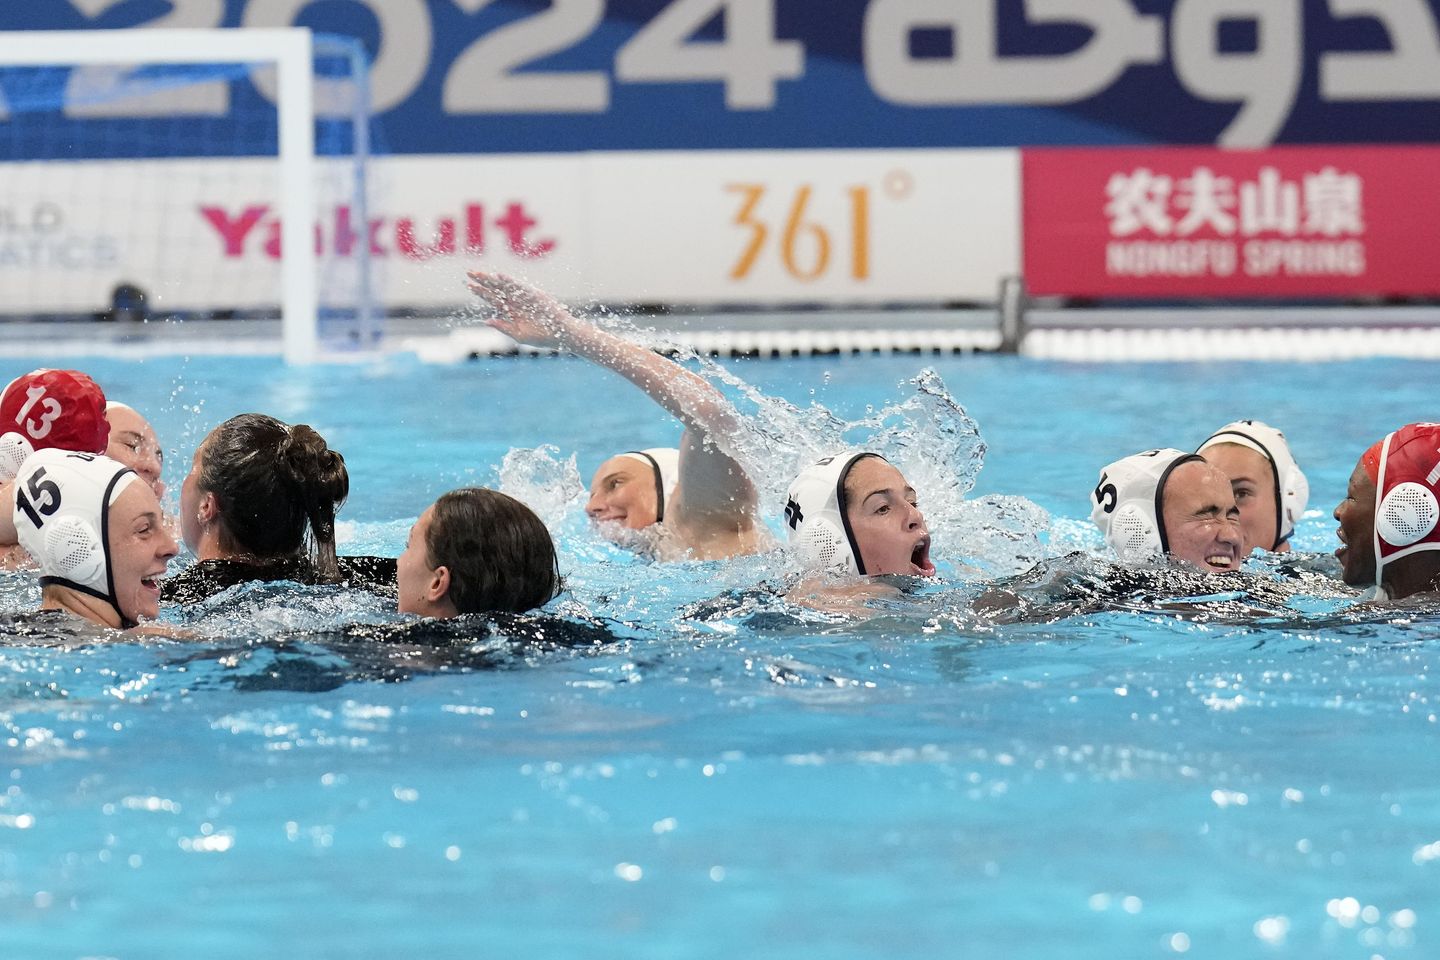 U.S. wins another women's water polo world title, beating Hungary 8-7 for gold
